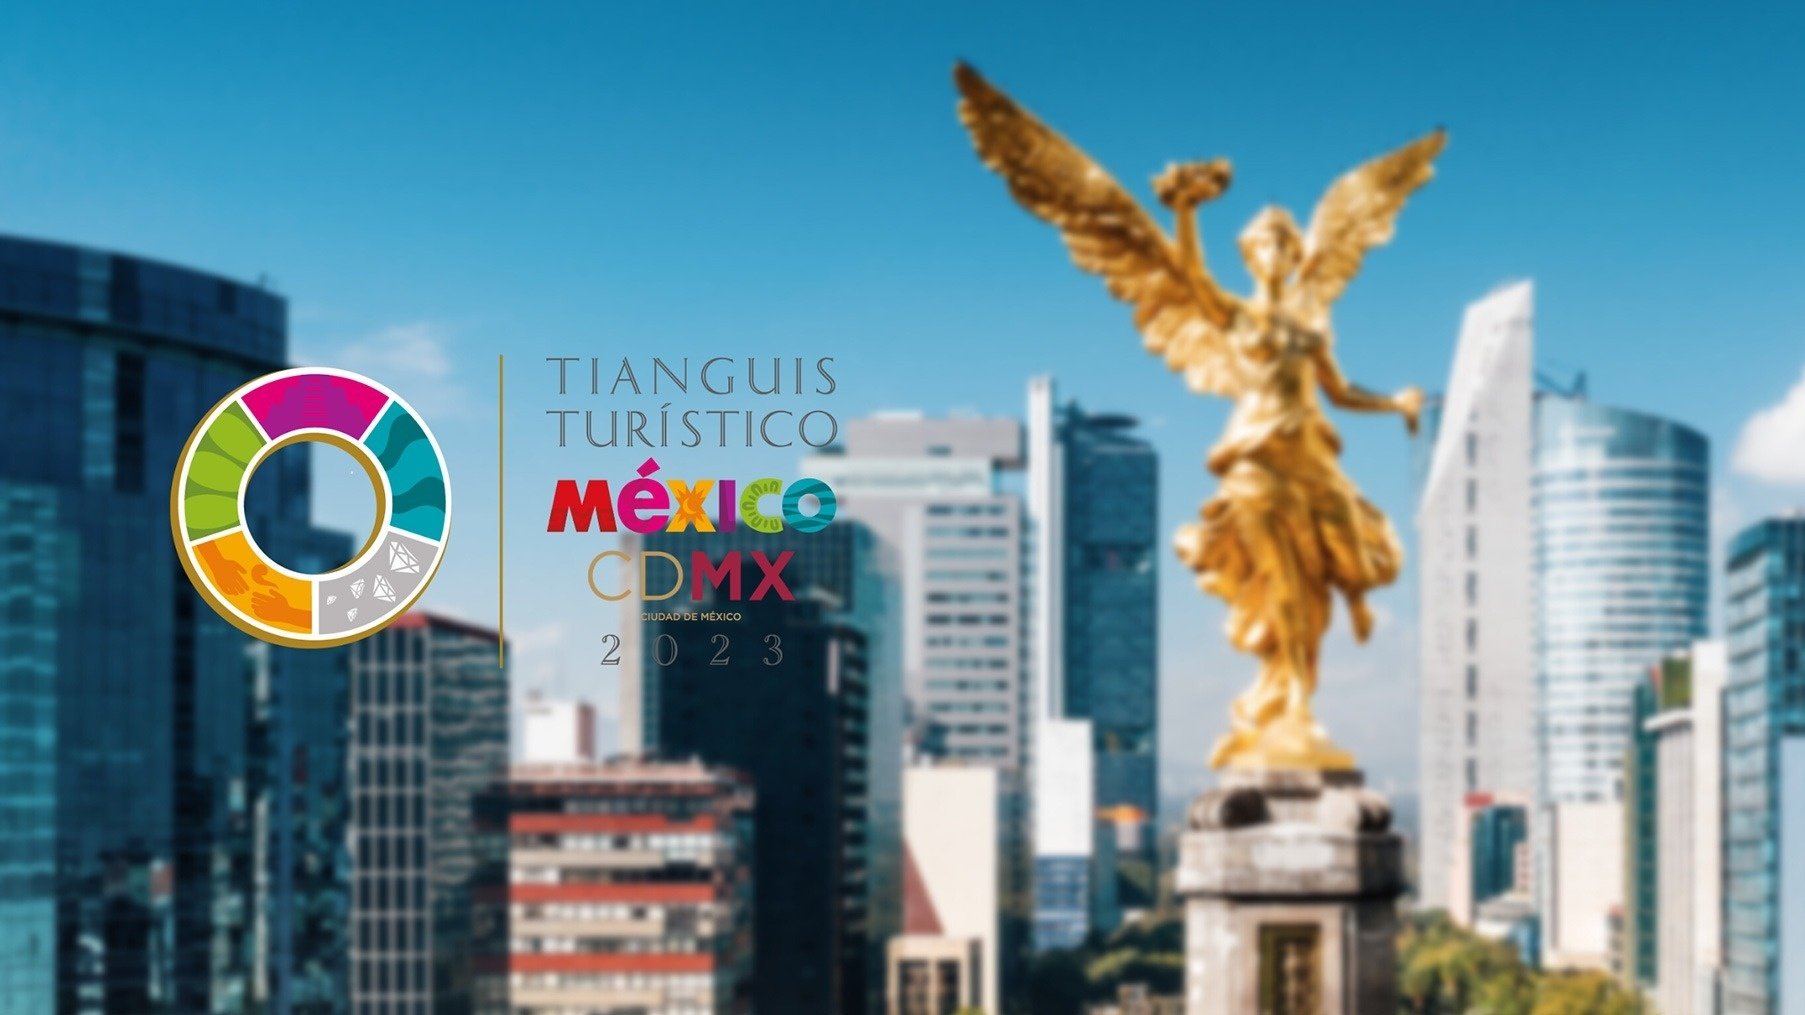 Paraty Tech will attend the Tianguis Turístico in Mexico City